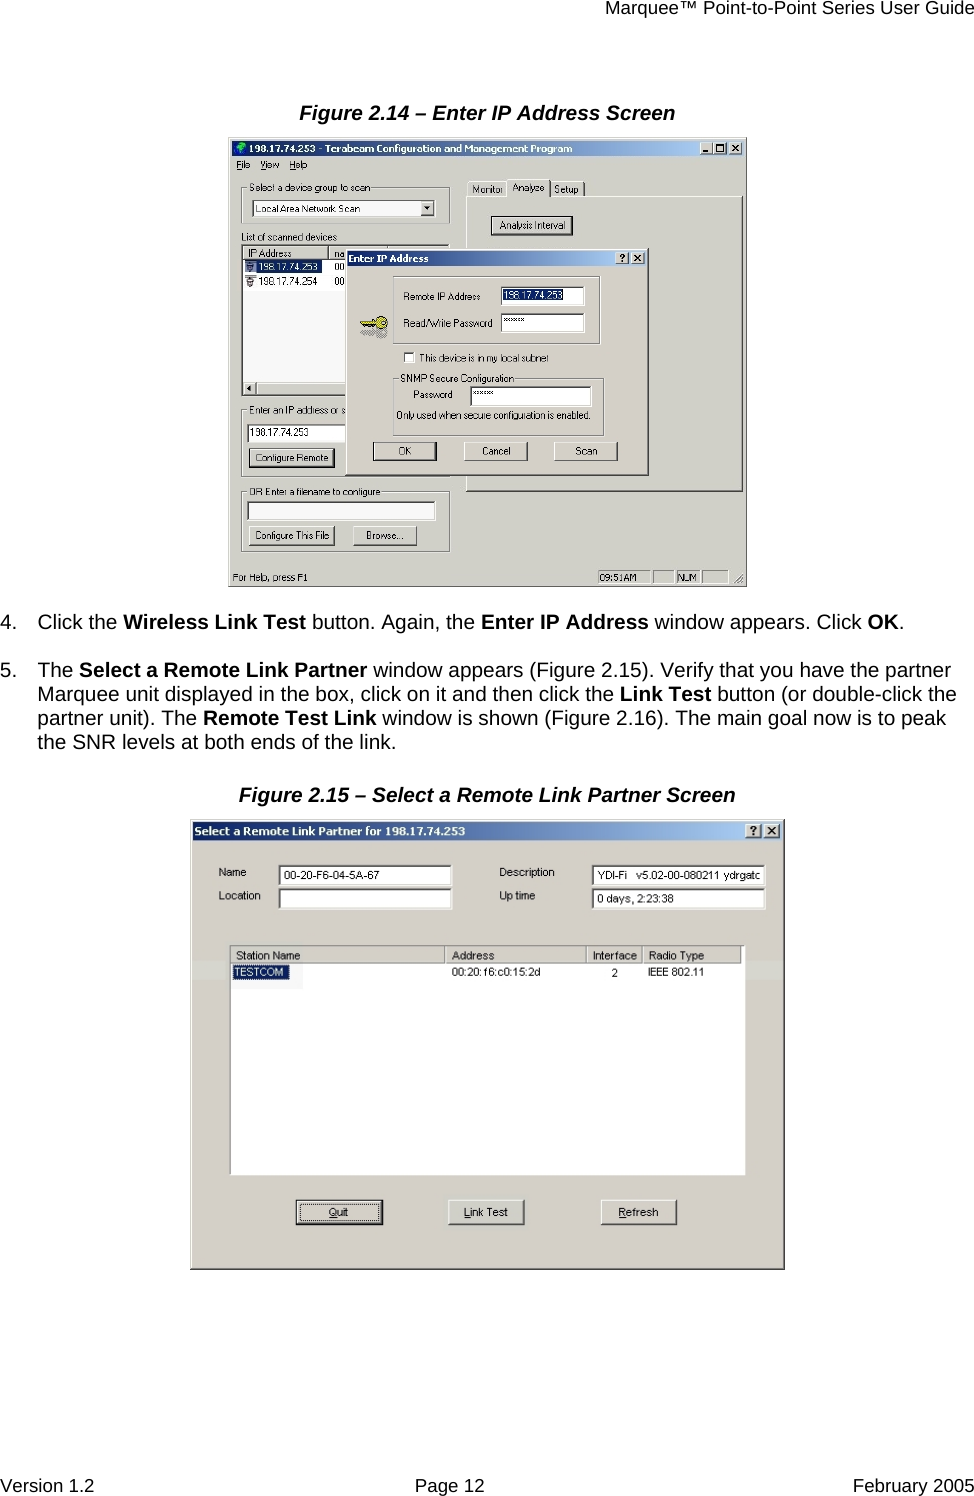     Marquee™ Point-to-Point Series User Guide Figure 2.14 – Enter IP Address Screen    5.   appears (Figure 2.15). Verify that you have the partner Marquee unit displayed in the box, click on it and then click the Link Test button (or double-click the partner unit). The Remote Test Li 16). The main goal now is to peak the SNR levels at both ends of the link. Figure 2.15 – Select a Remote Link Partner Screen 4. Click the Wireless Link Test button. Again, the Enter IP Address window appears. Click OK. The Select a Remote Link Partner windownk window is shown (Figure 2. Version 1.2  Page 12  February 2005 